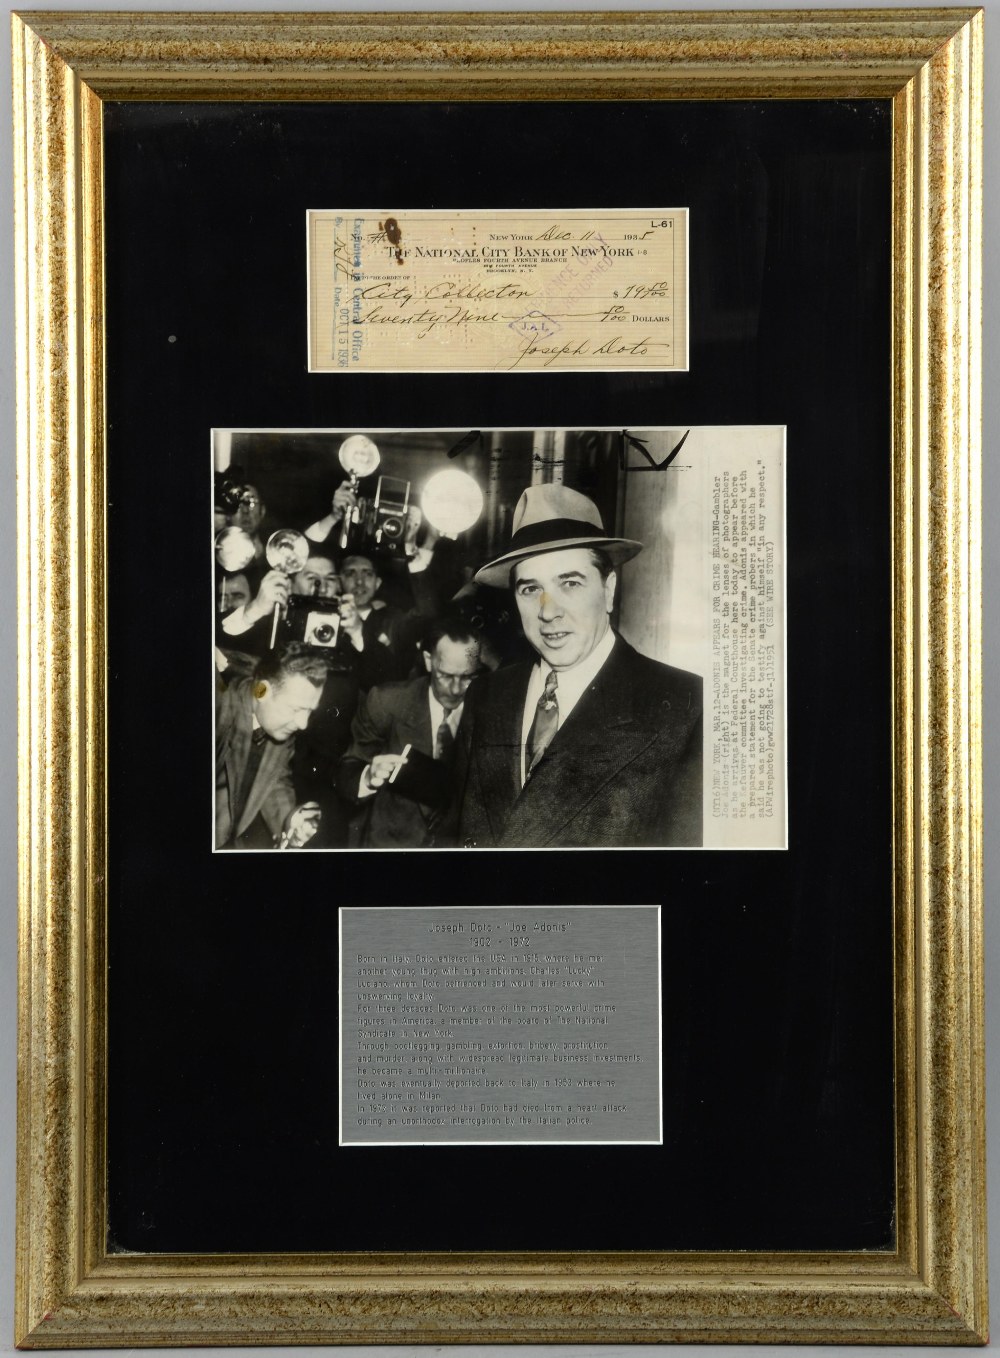 Joe Adonis (1902 - 1971) New York mobster who was an important participant in the formation of the